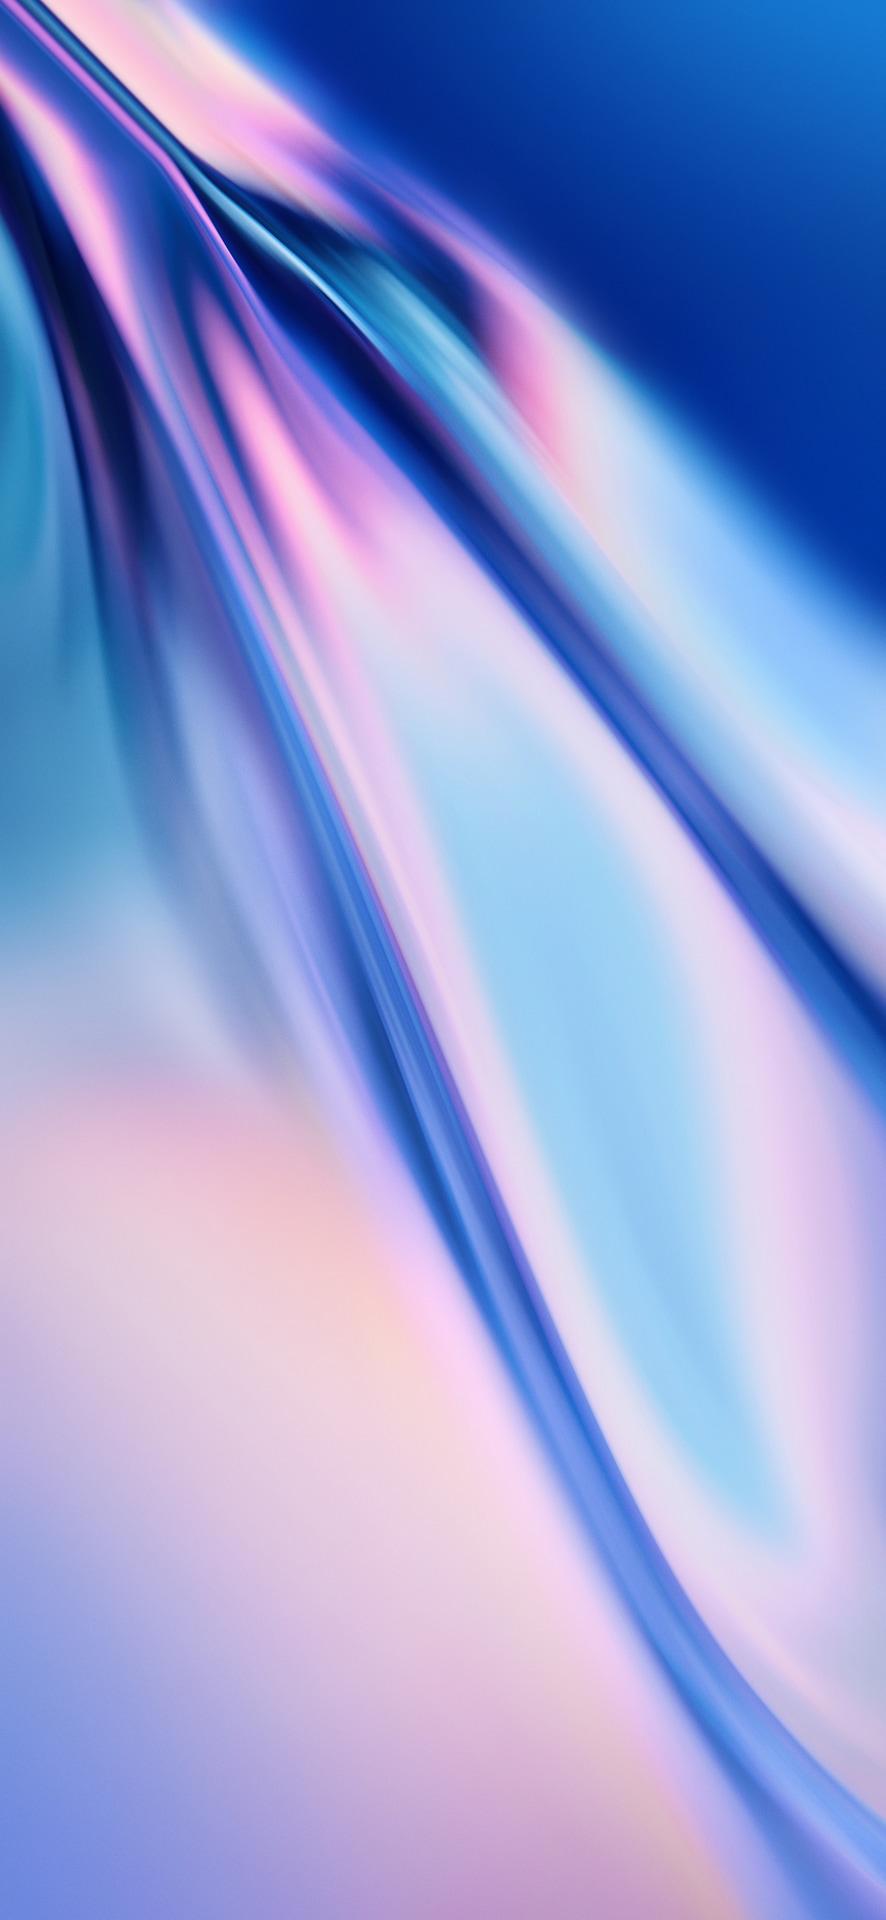 Download the OnePlus 7 Pro wallpaper here